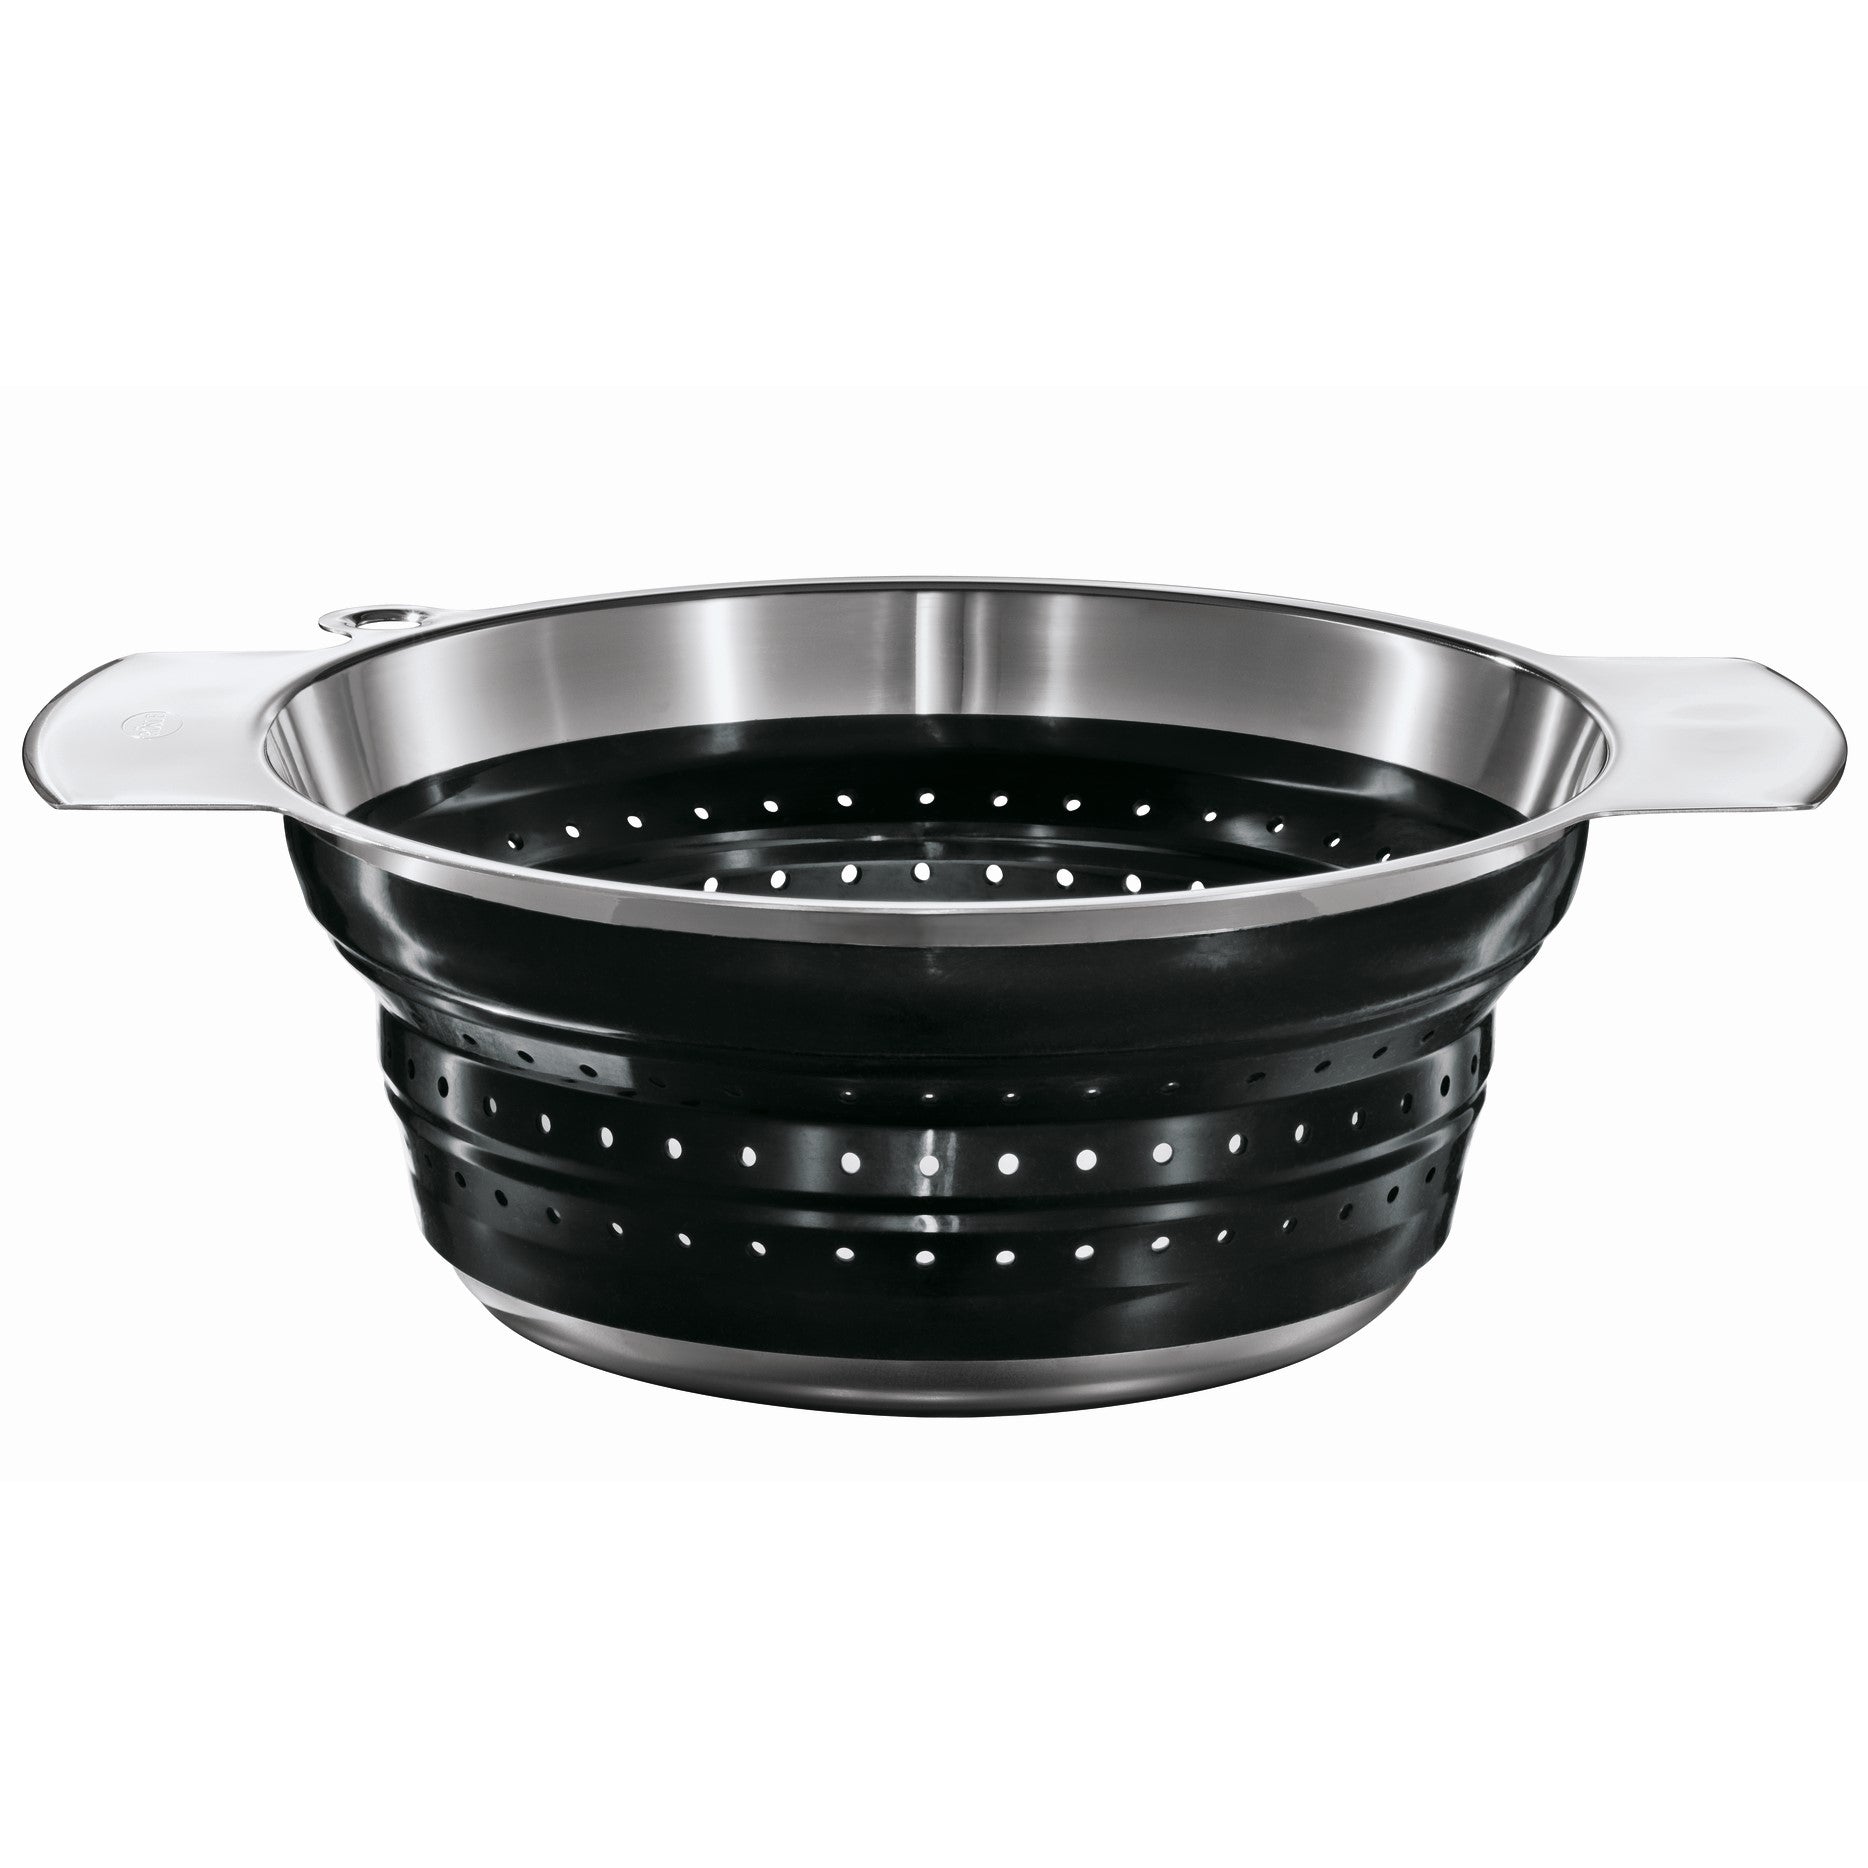 Roesle Collapsible Colander for Easy Storage and Dishwashing 24cm Black